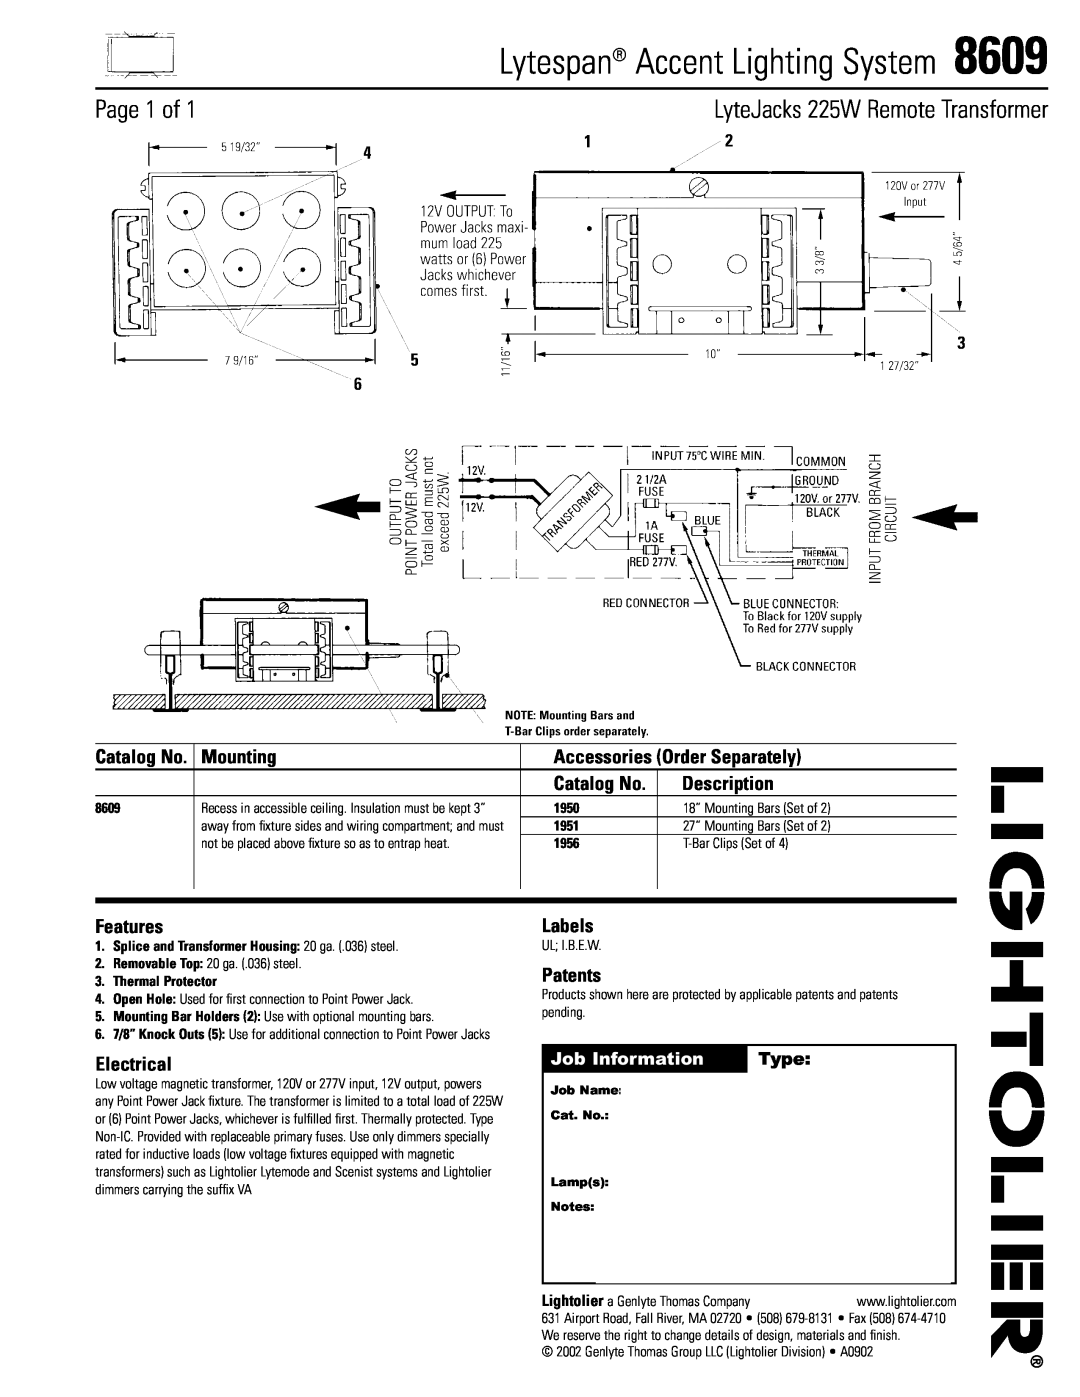 Lightolier 8609 manual Lytespan Accent Lighting System, Page 1 of, LyteJacks 225W Remote Transformer, Mounting, Features 